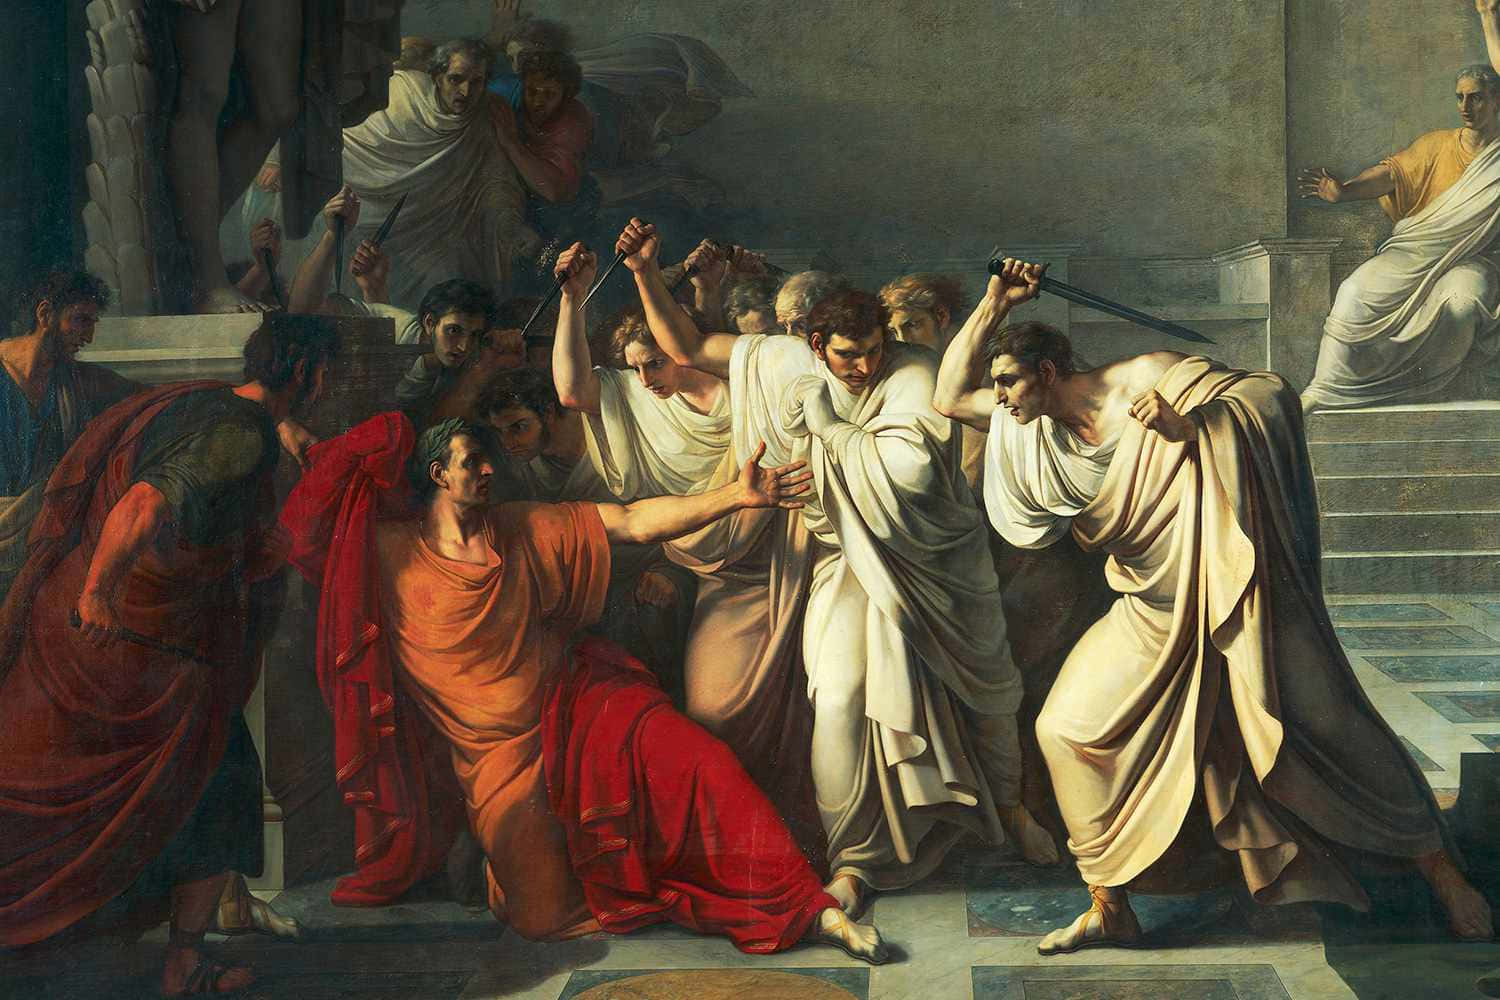 The Ides of March - A stormy Roman night Wallpaper